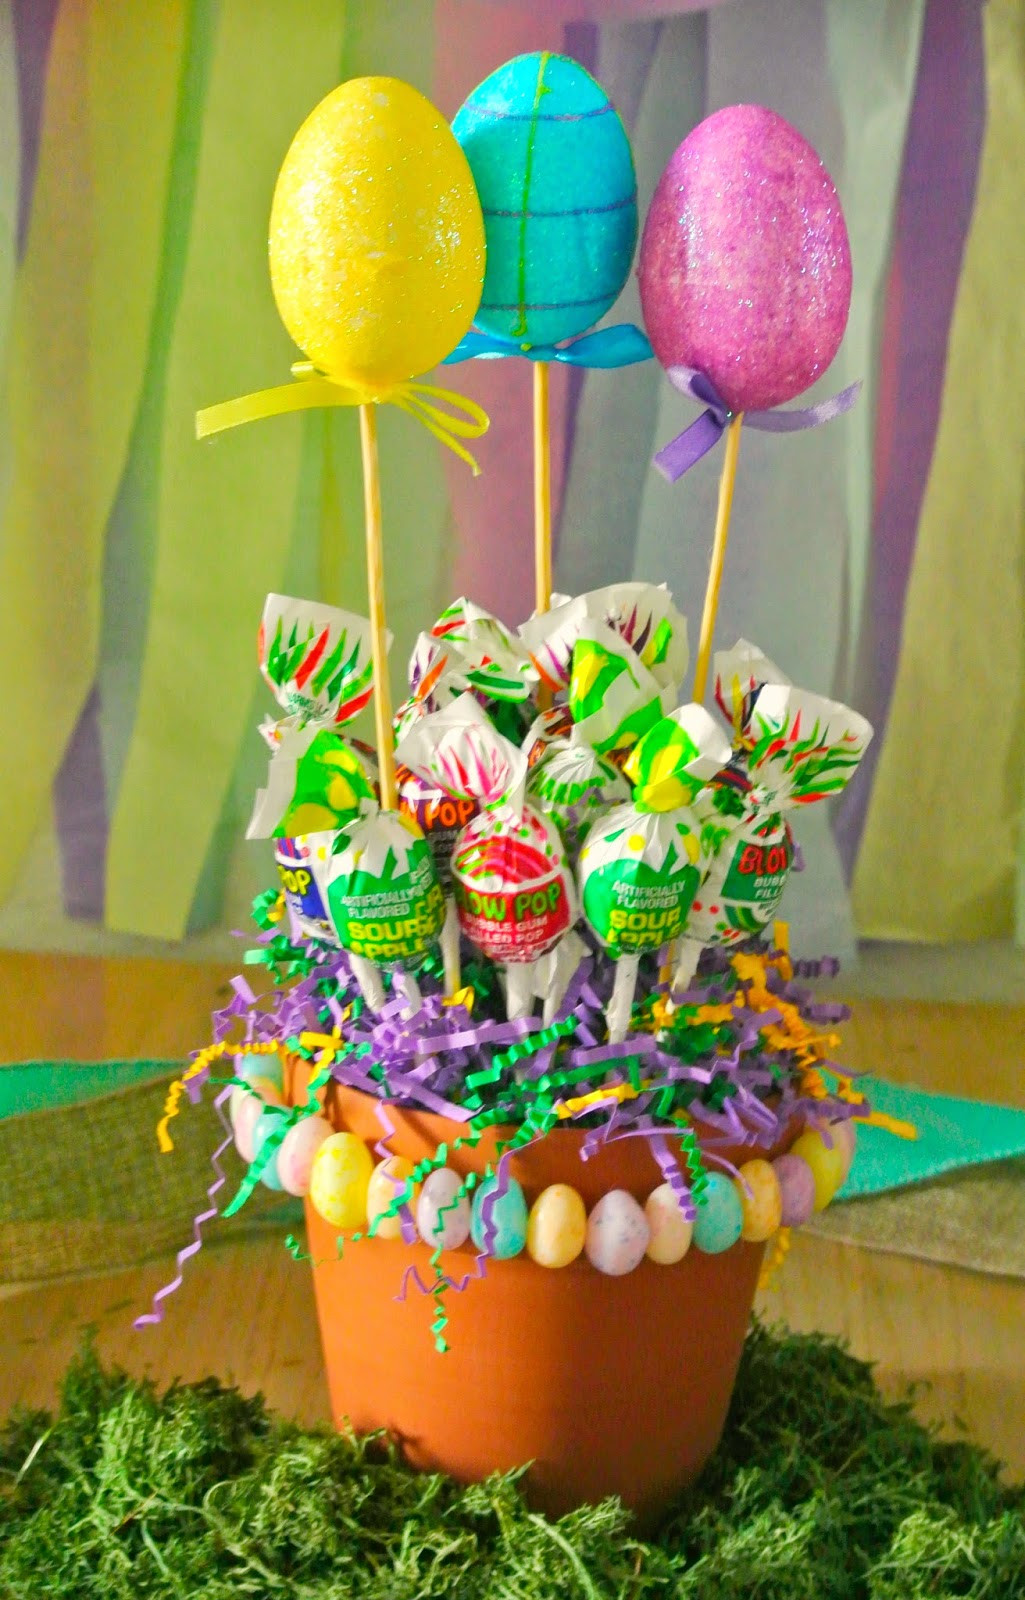 Easter Candy Crafts
 B is 4 Easter and Spring Crafts Dollar Tree Giveaway